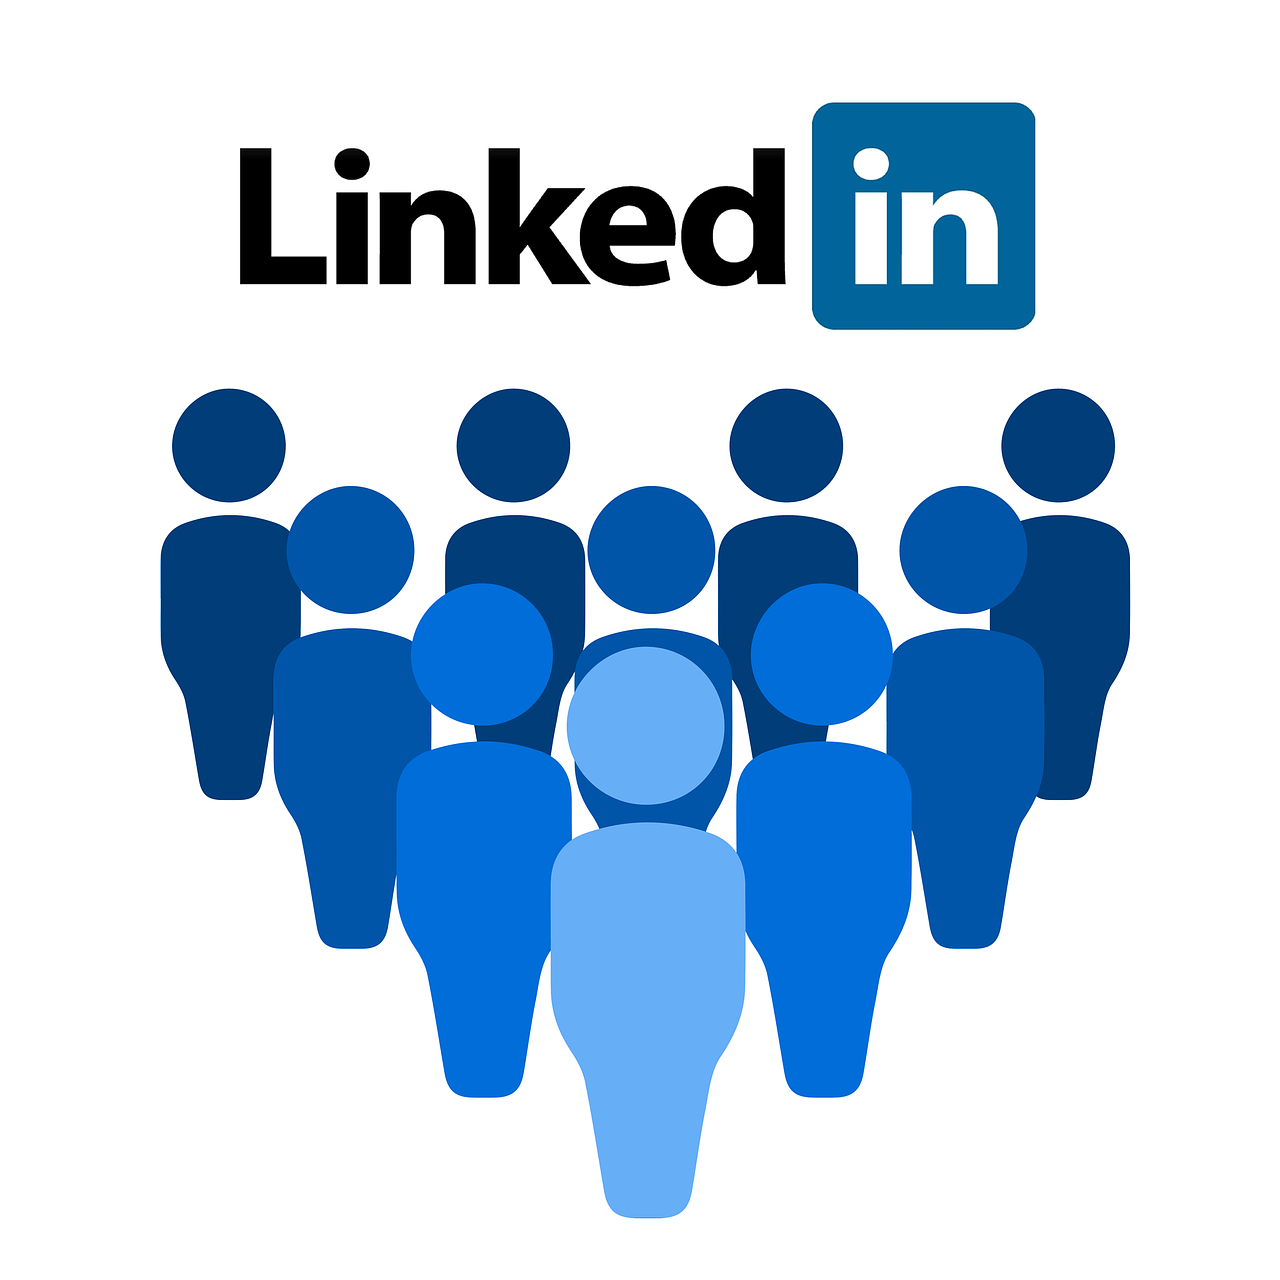 Explore LinkedIn's role in healthcare SEO. Learn strategies to build professional networks, share insights, and elevate your online presence.